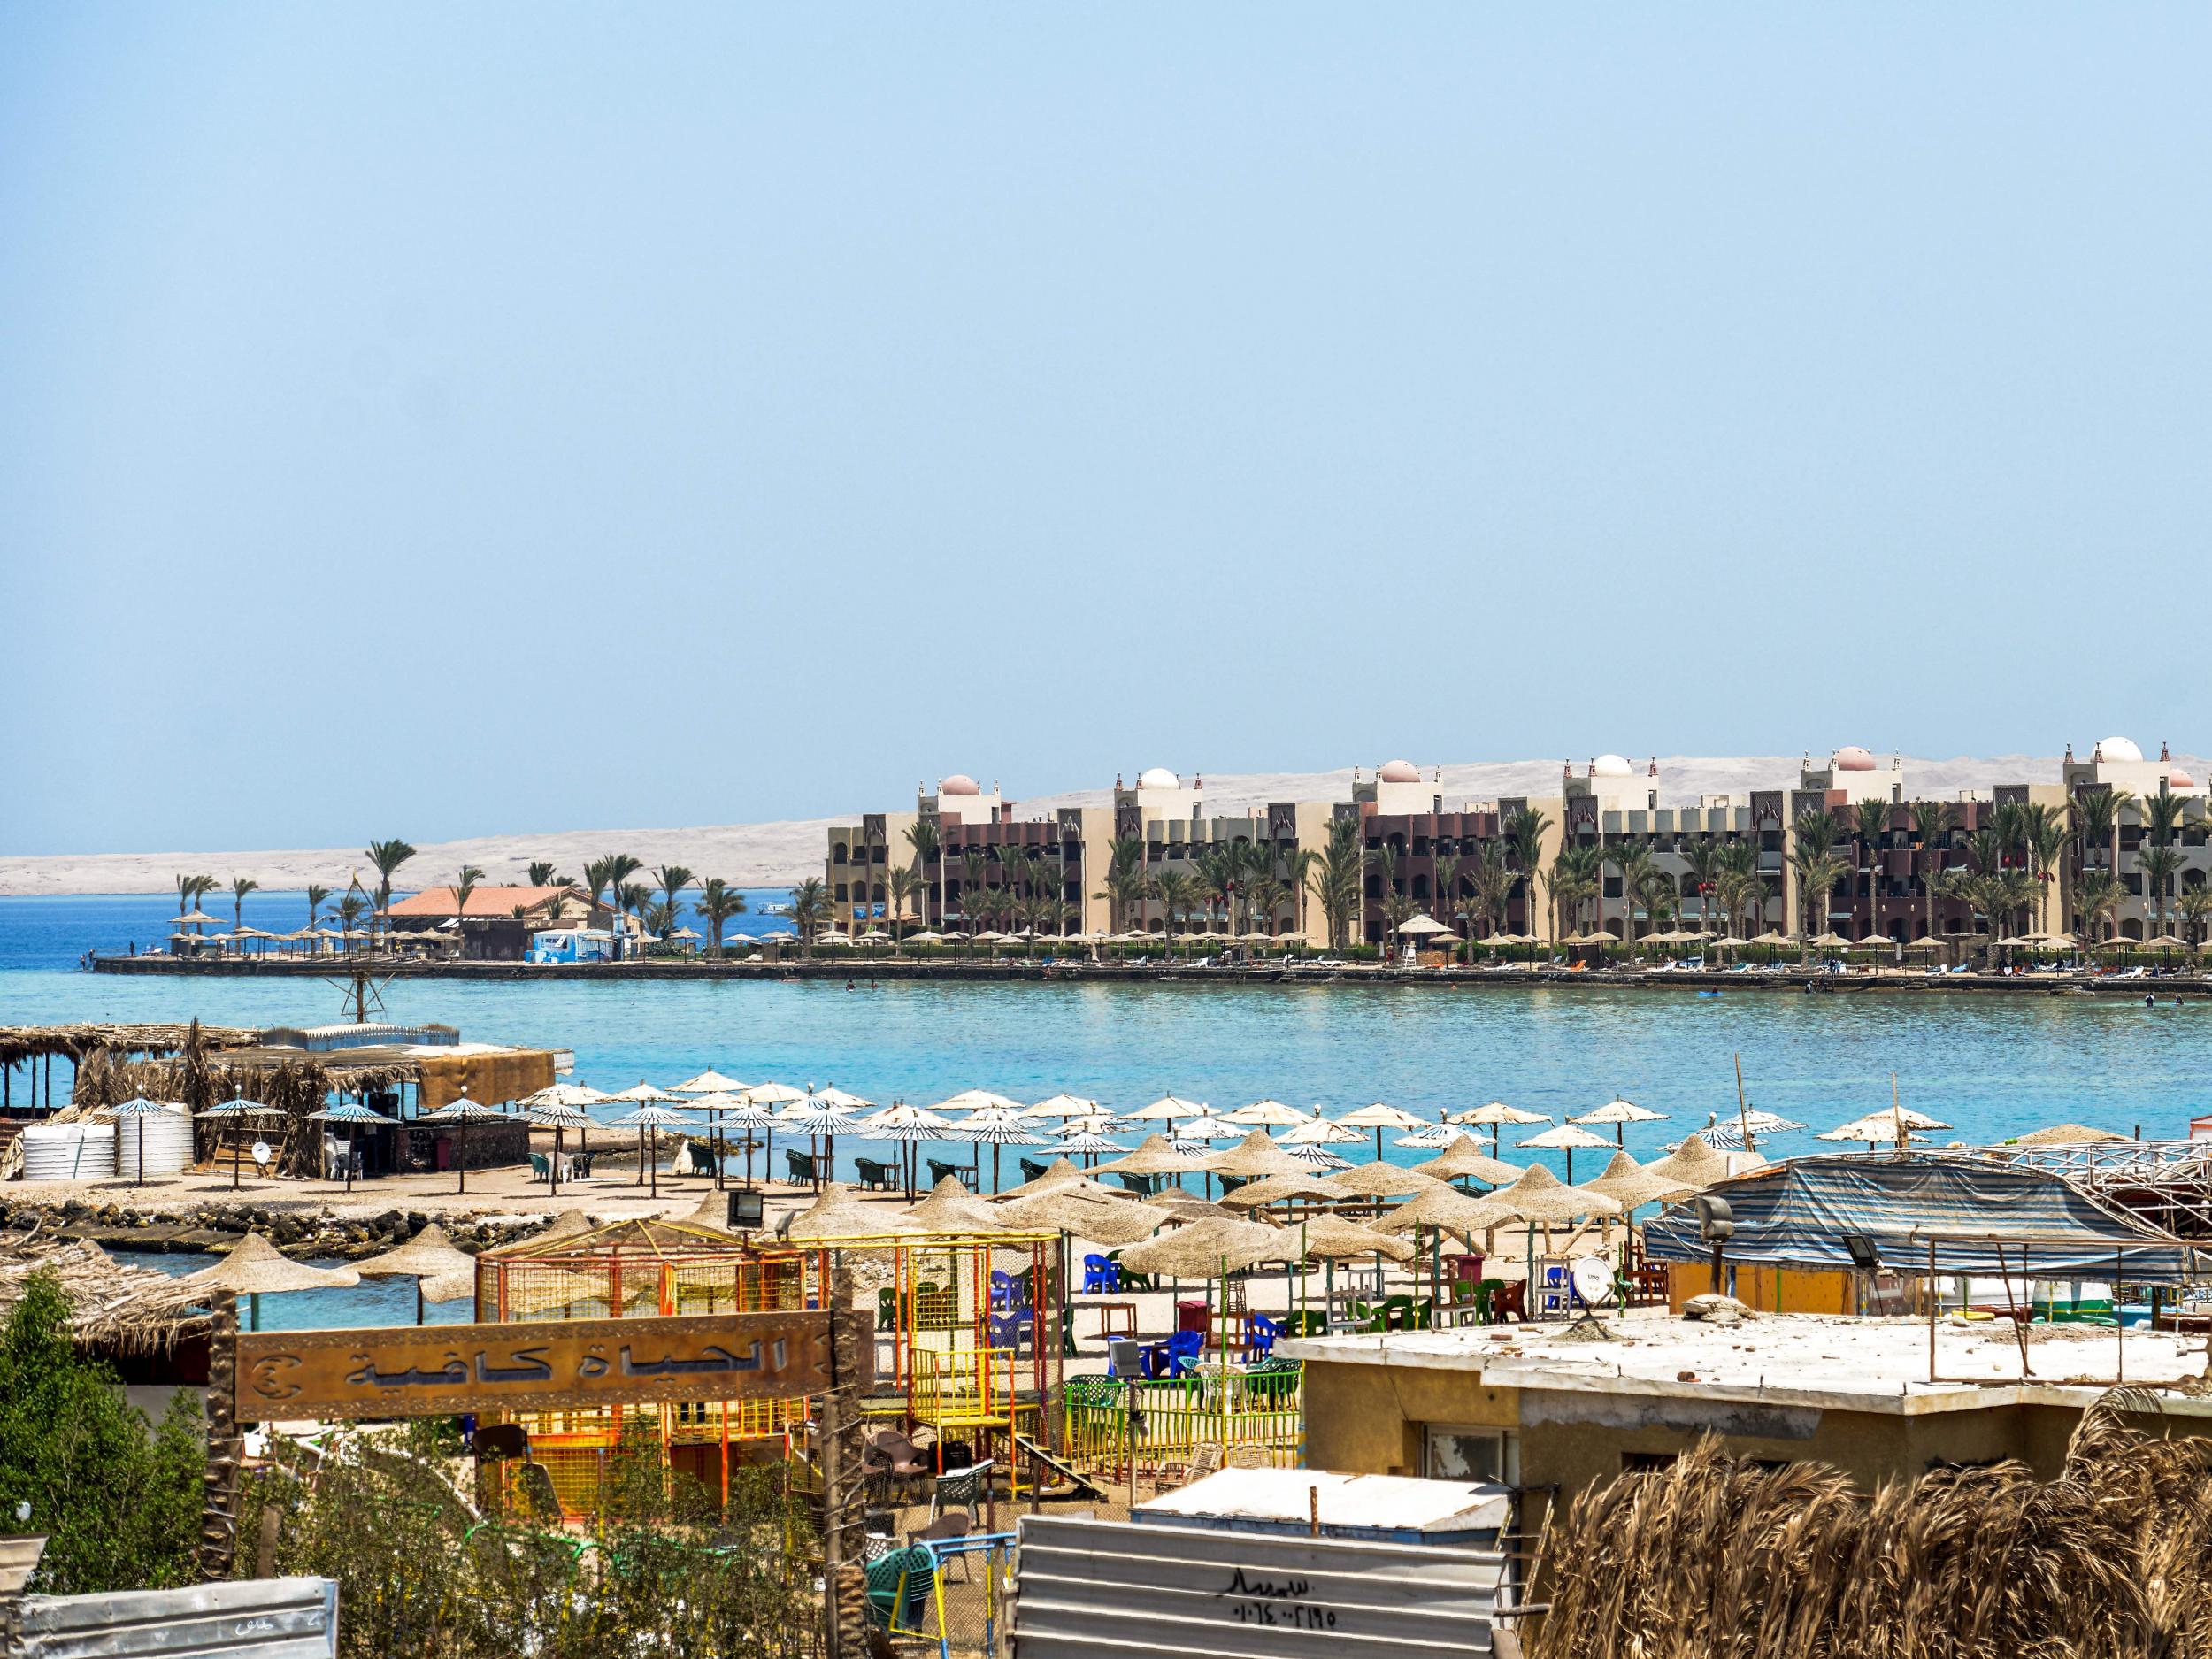 General view of the Sunny Days Elpalacio beach in the Egyptian Red Sea resort city of Hurghada, where an Egyptian stabbed to death two German tourists and injured four others